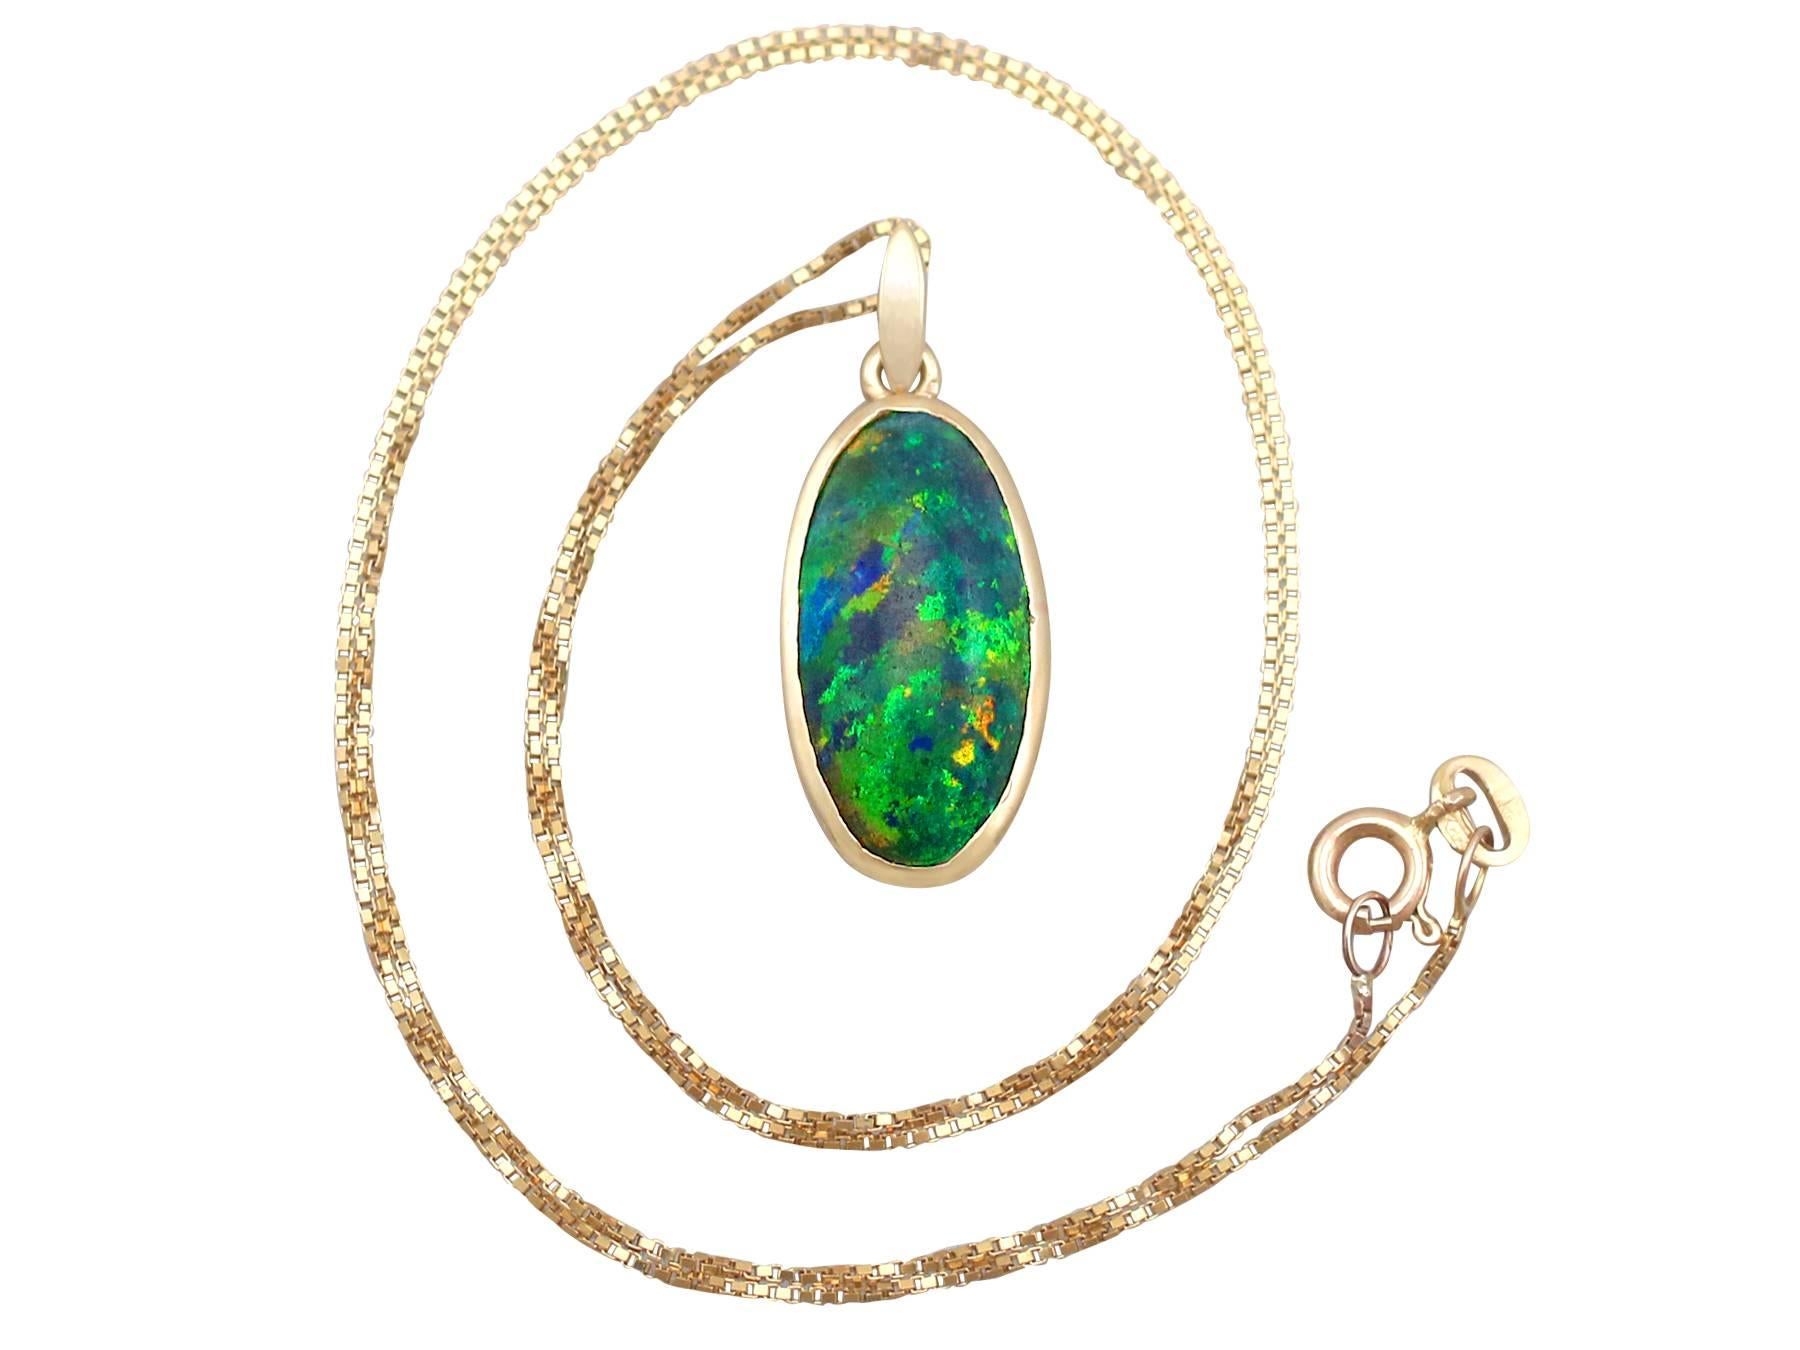 An impressive vintage 3.82 carat black opal and 9 karat yellow gold pendant and chain; part of our diverse opal jewelry and estate jewelry collections.

This fine and impressive black opal pendant has been crafted in 9k yellow gold.

The oval shaped